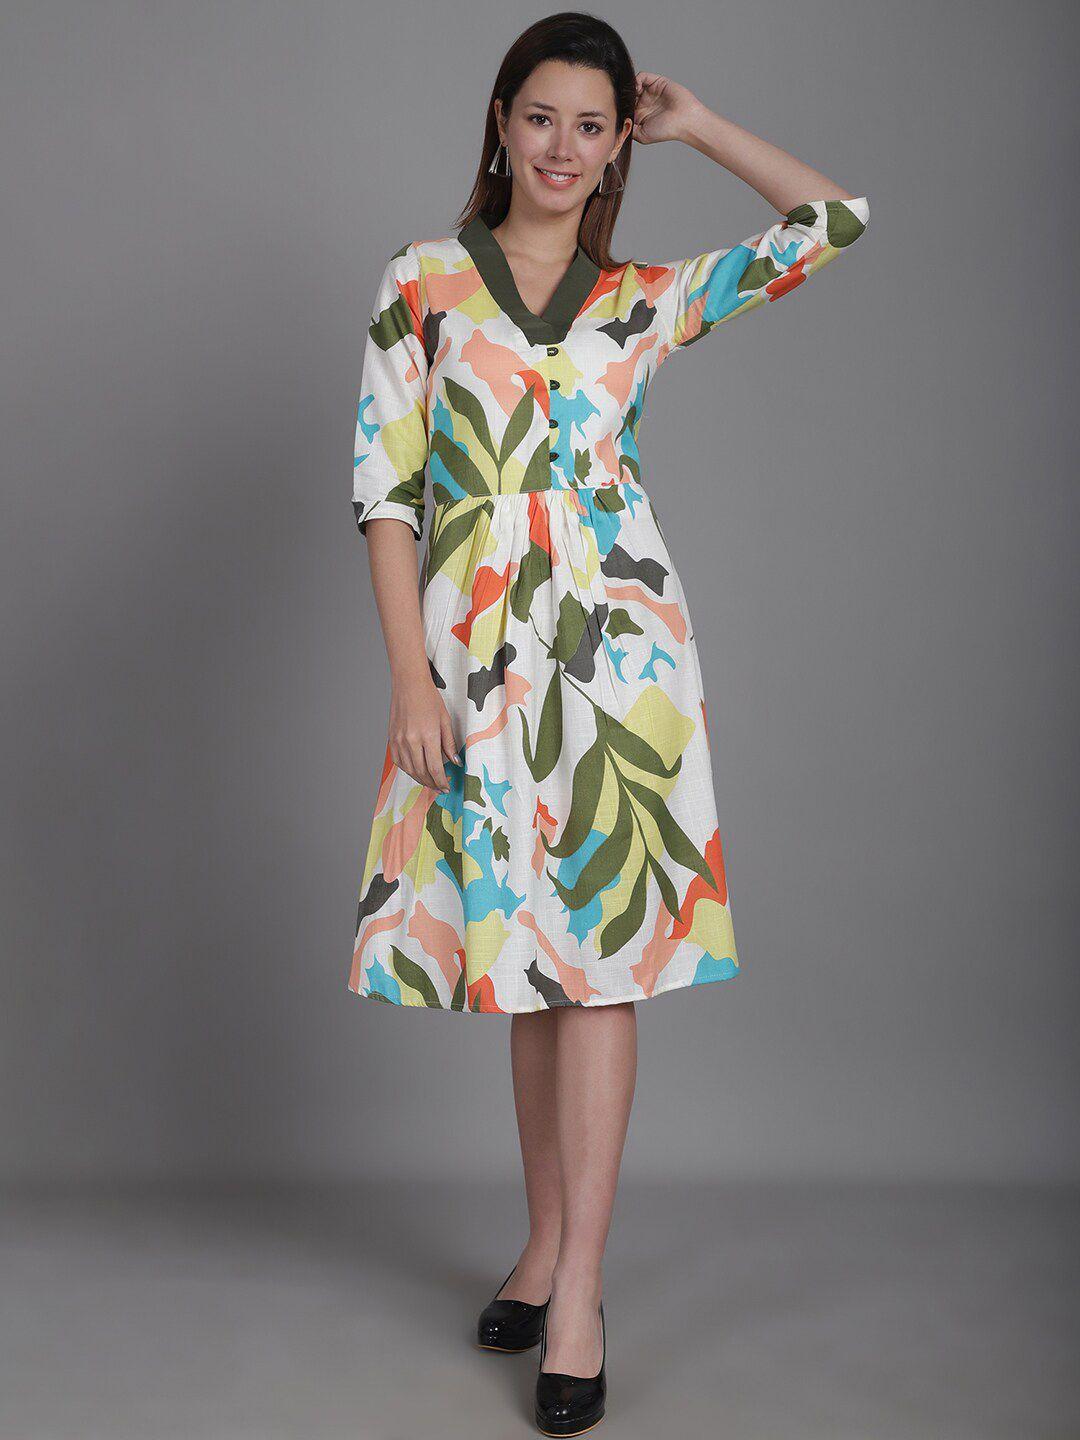 enchanted drapes cotton abstract printed  fit & flare dress